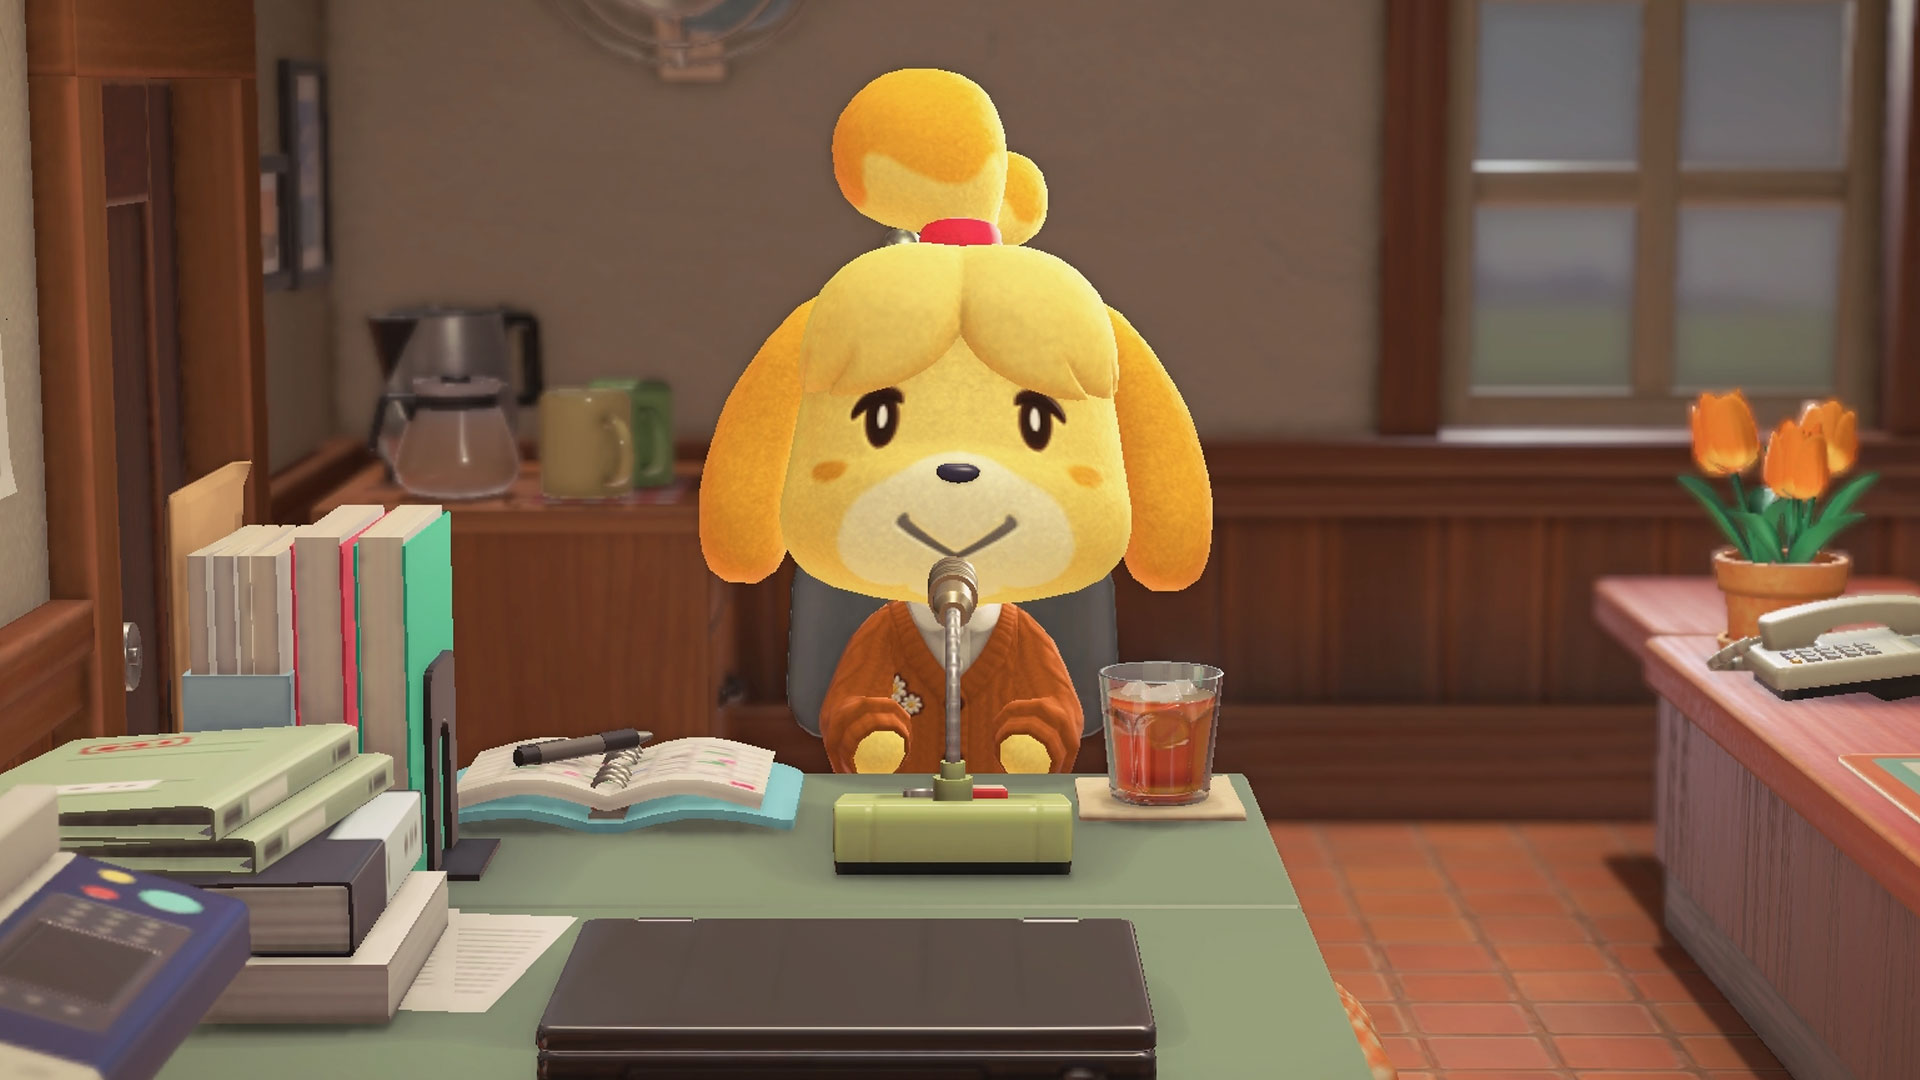 Isabelle, a little yellow dog, makes the daily announcements for the residents in the popular Nintendo game, "Animal Crossing: New Horizons."